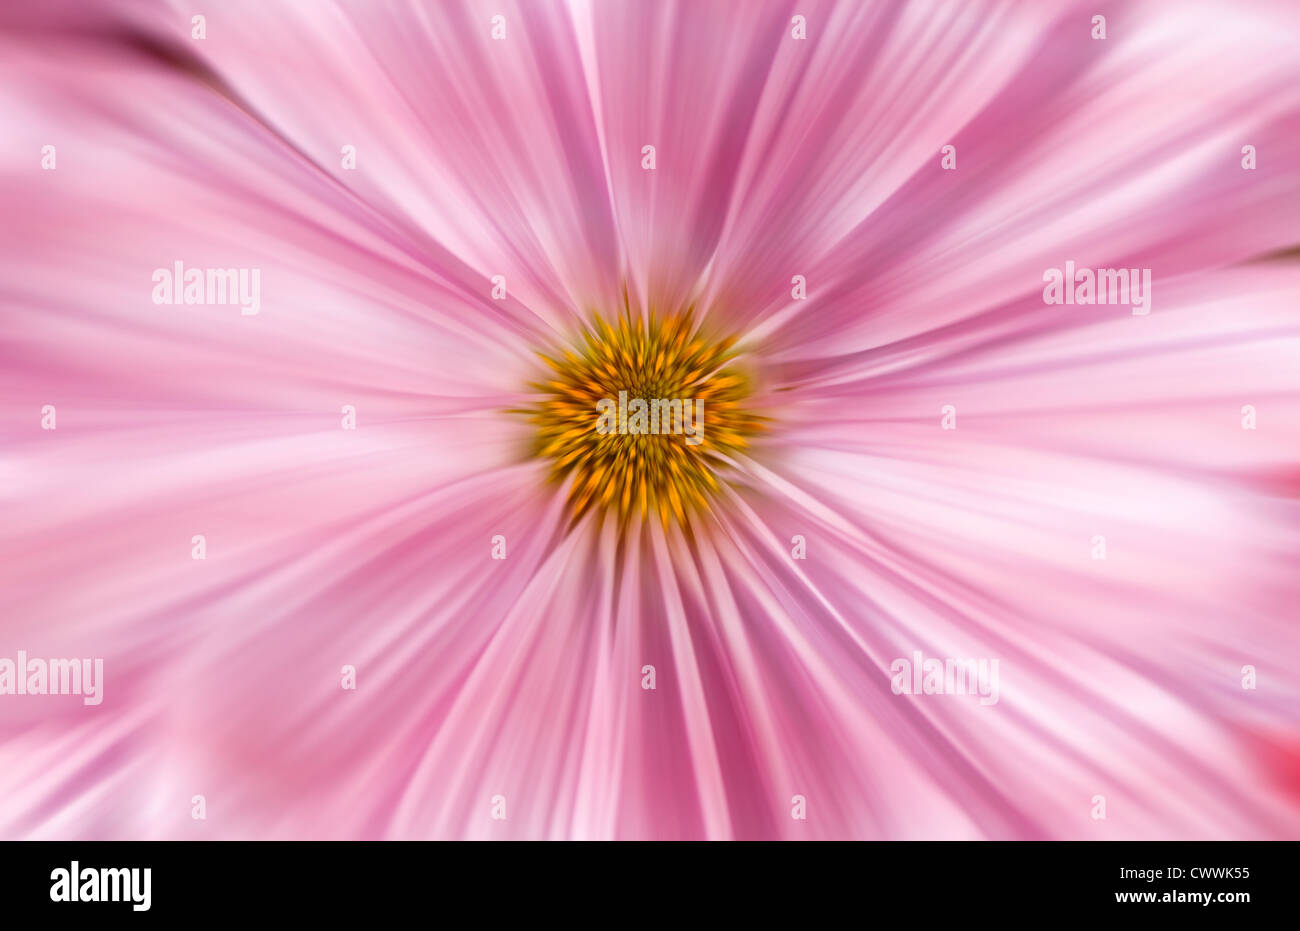 Pink daisy flower zoomed from center to edges Stock Photo